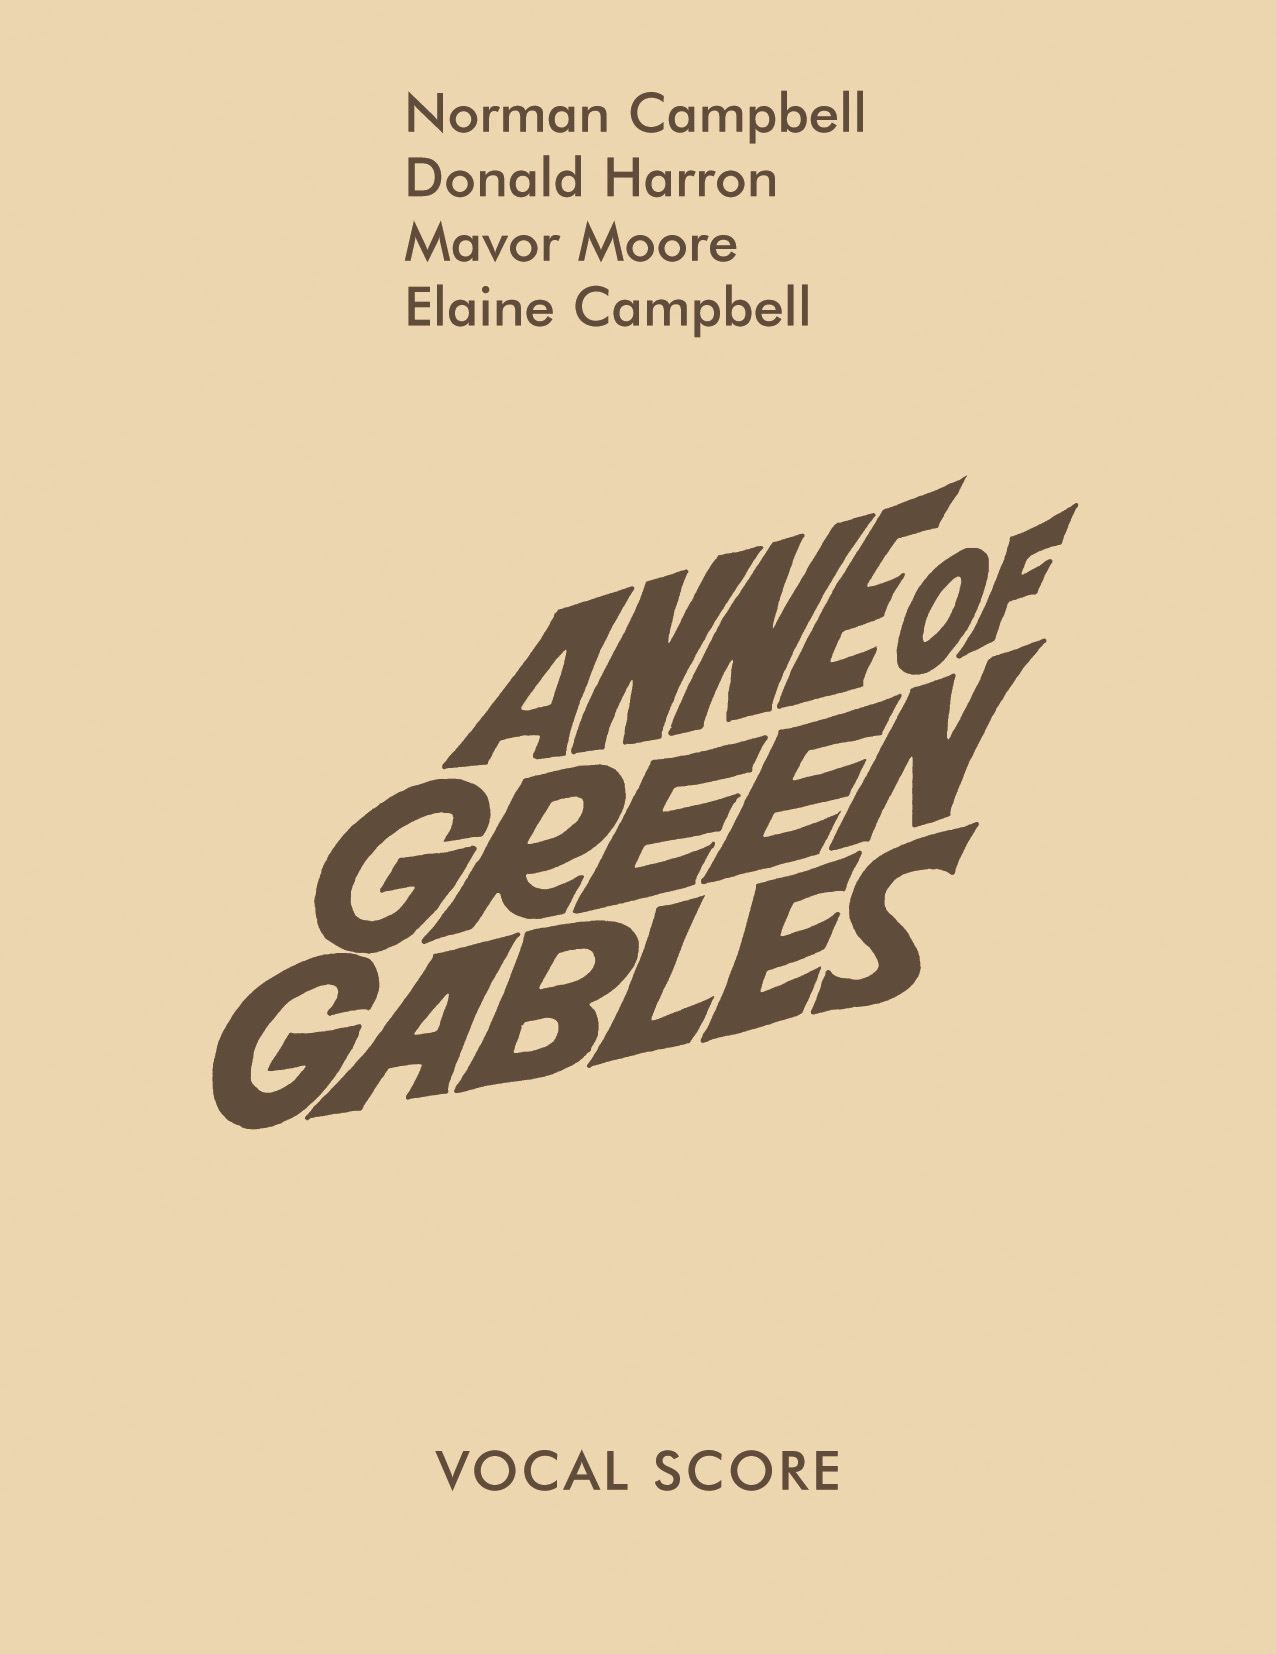 Anne Of Green Gables (Vocal Score) (CAMPBELL NORMAN / HARRON DON)